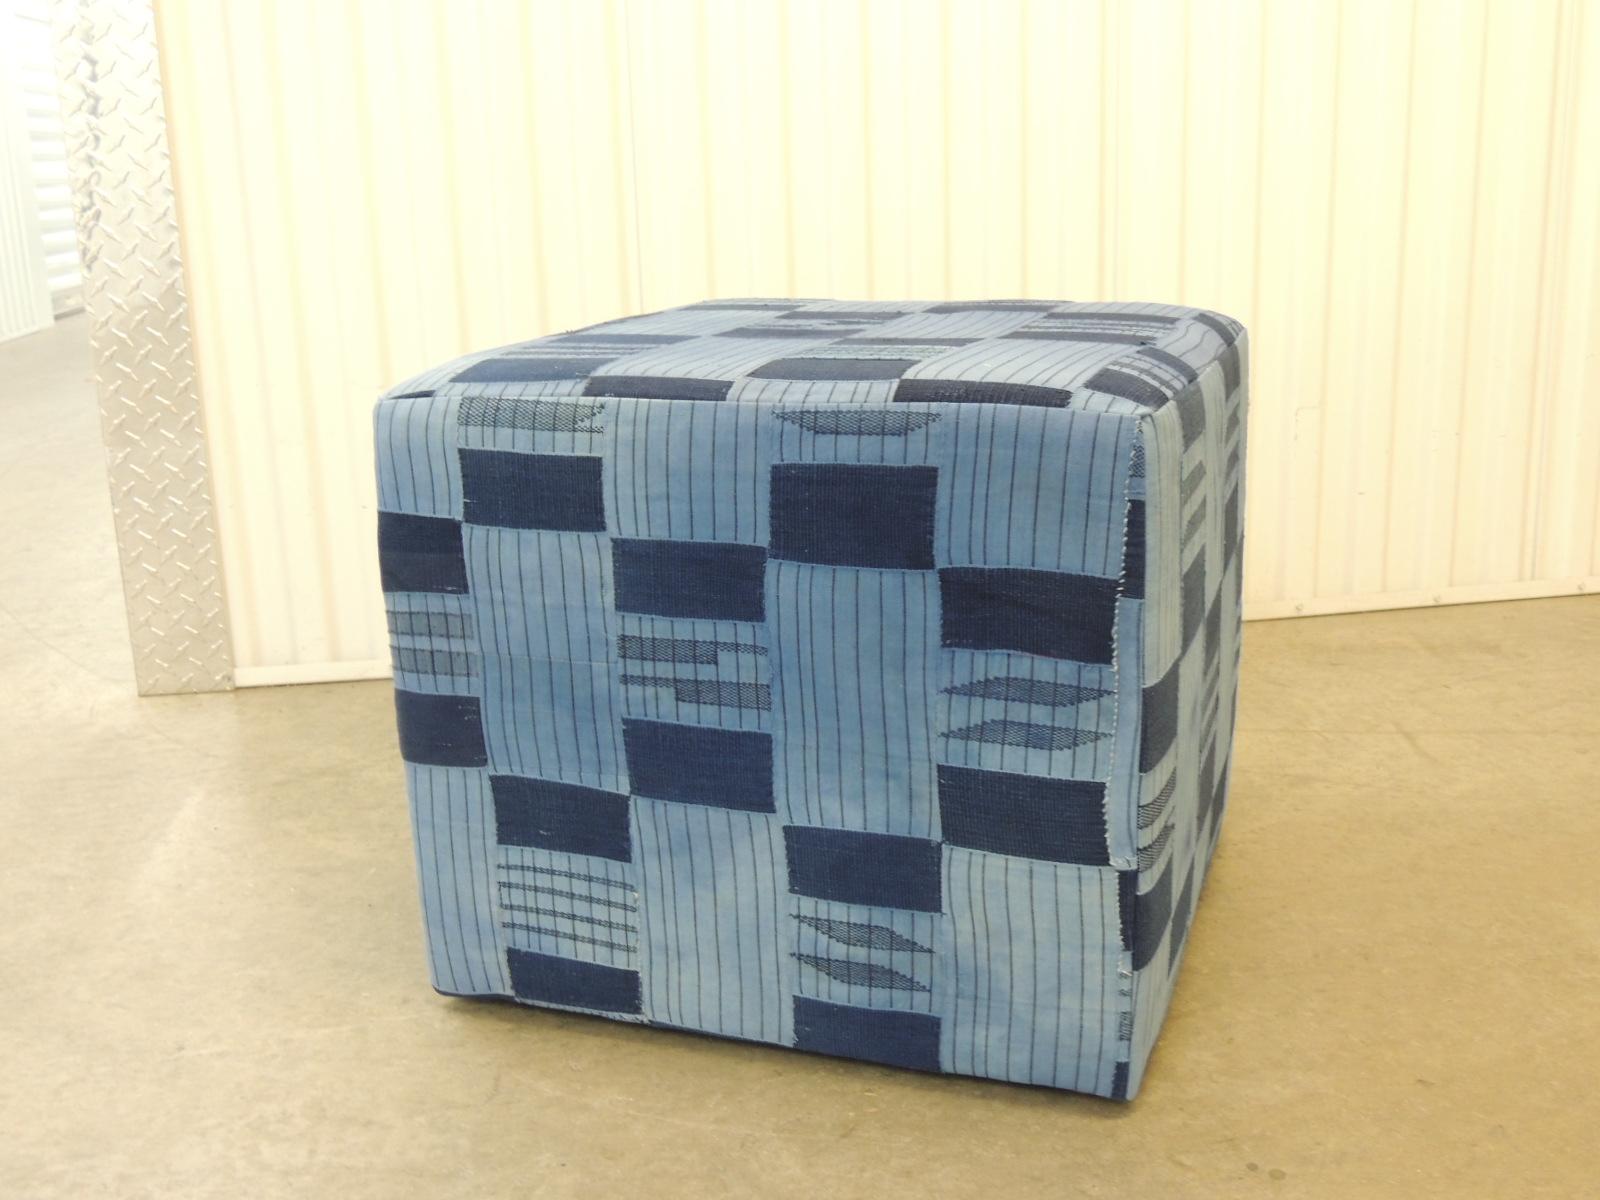 Vintage African blue and indigo woven textile custom square ottoman. Wood frame with padded construction all around and small tack feet.
The Yoruba are masters of the indigo-dyeing process. They also have the most varied methods of applying resists